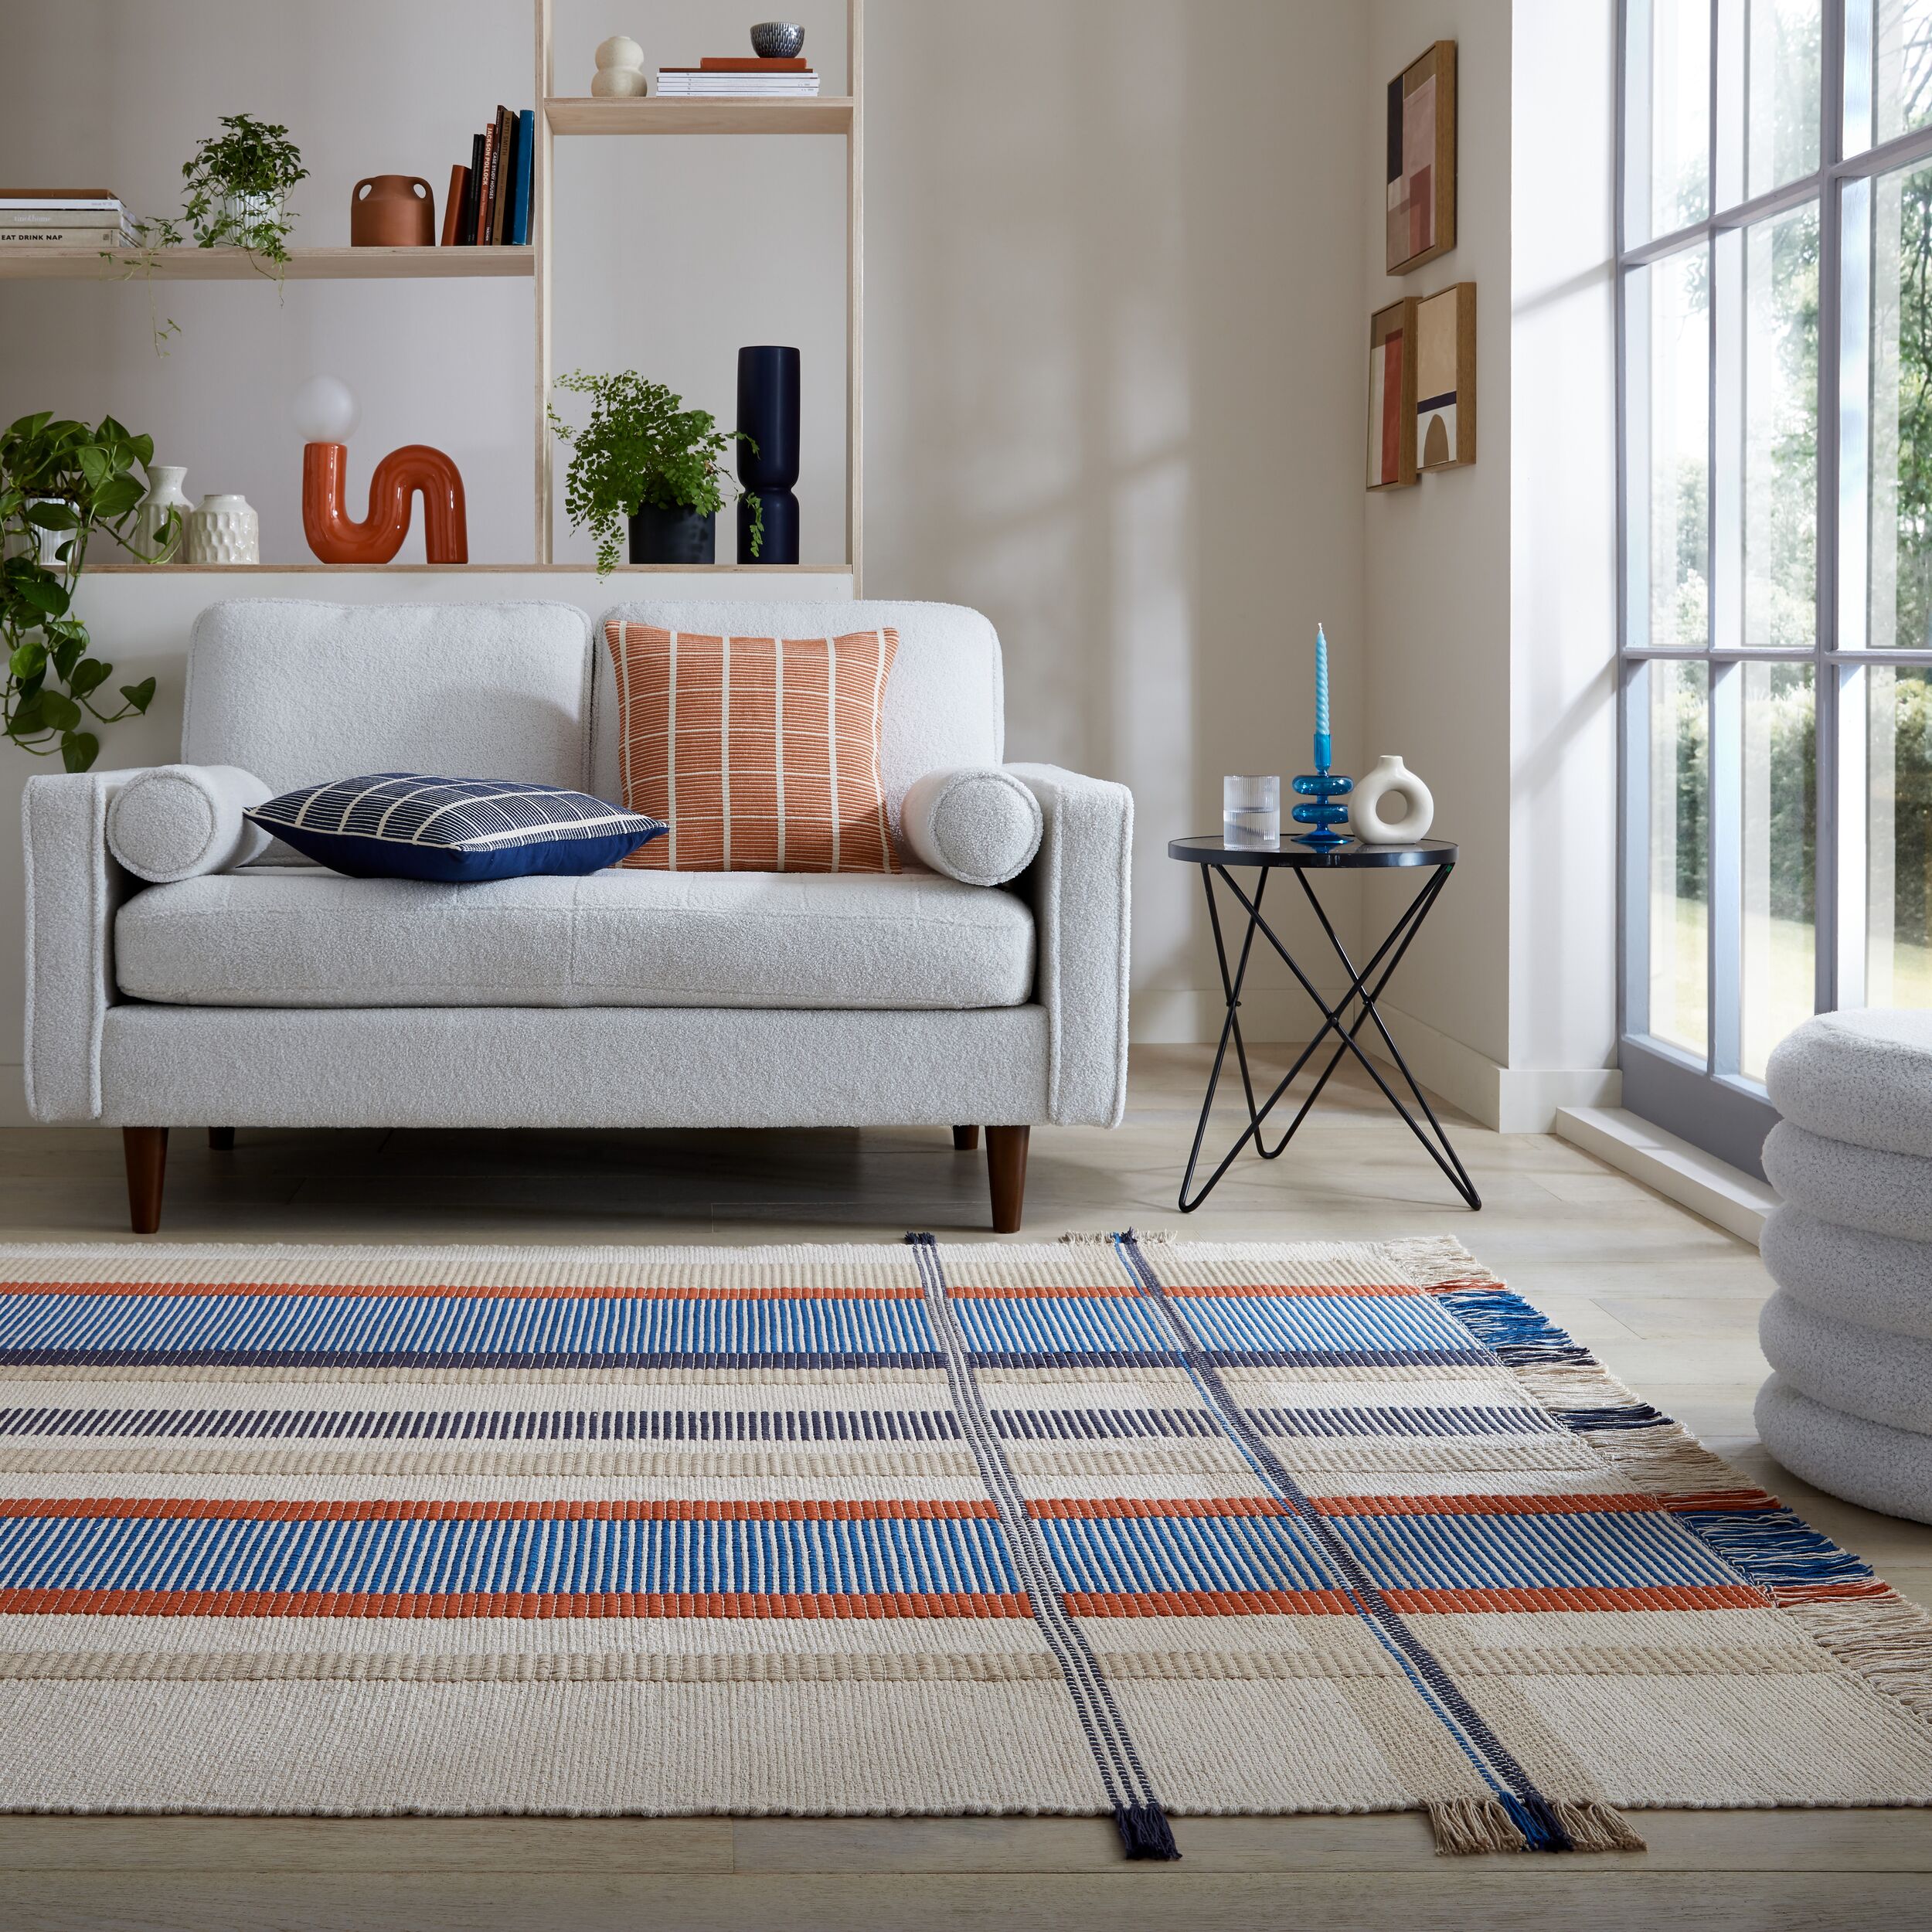 Elements Woven Checked Rug